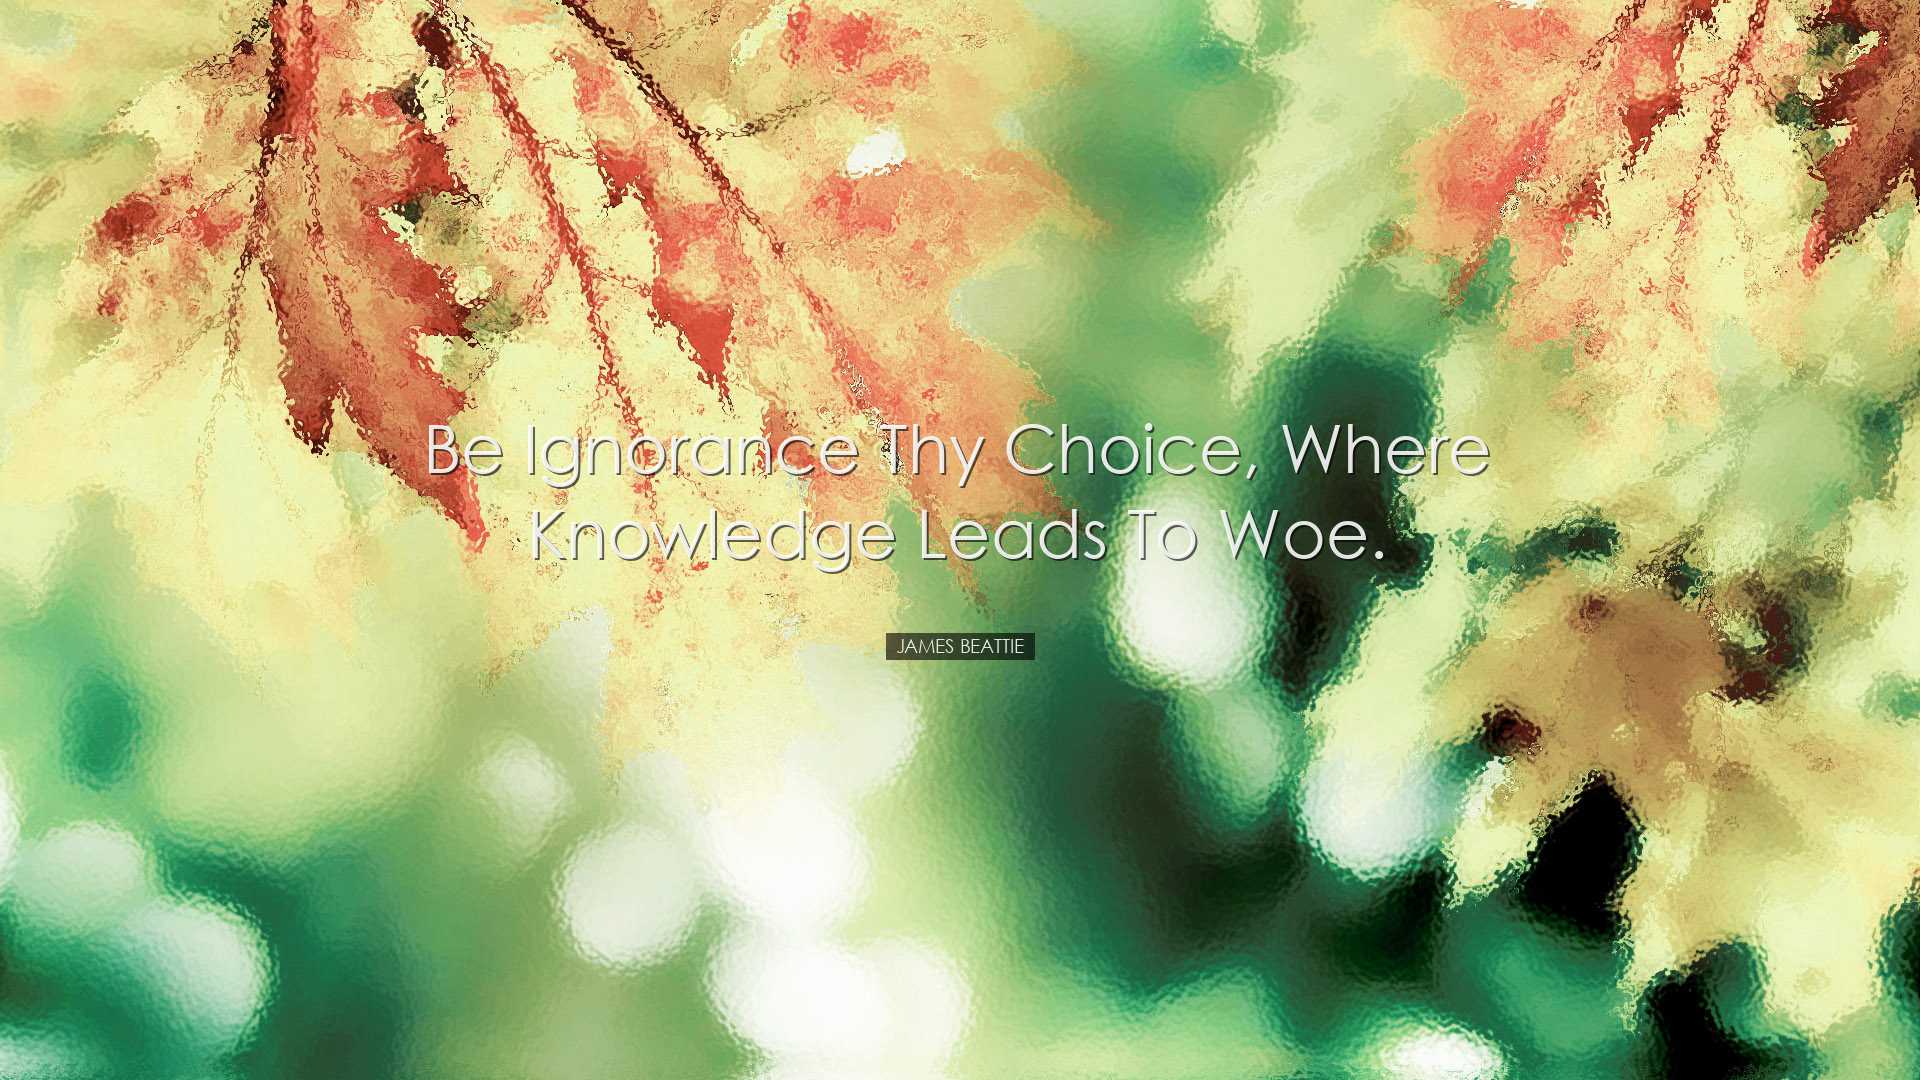 Be ignorance thy choice, where knowledge leads to woe. - James Bea